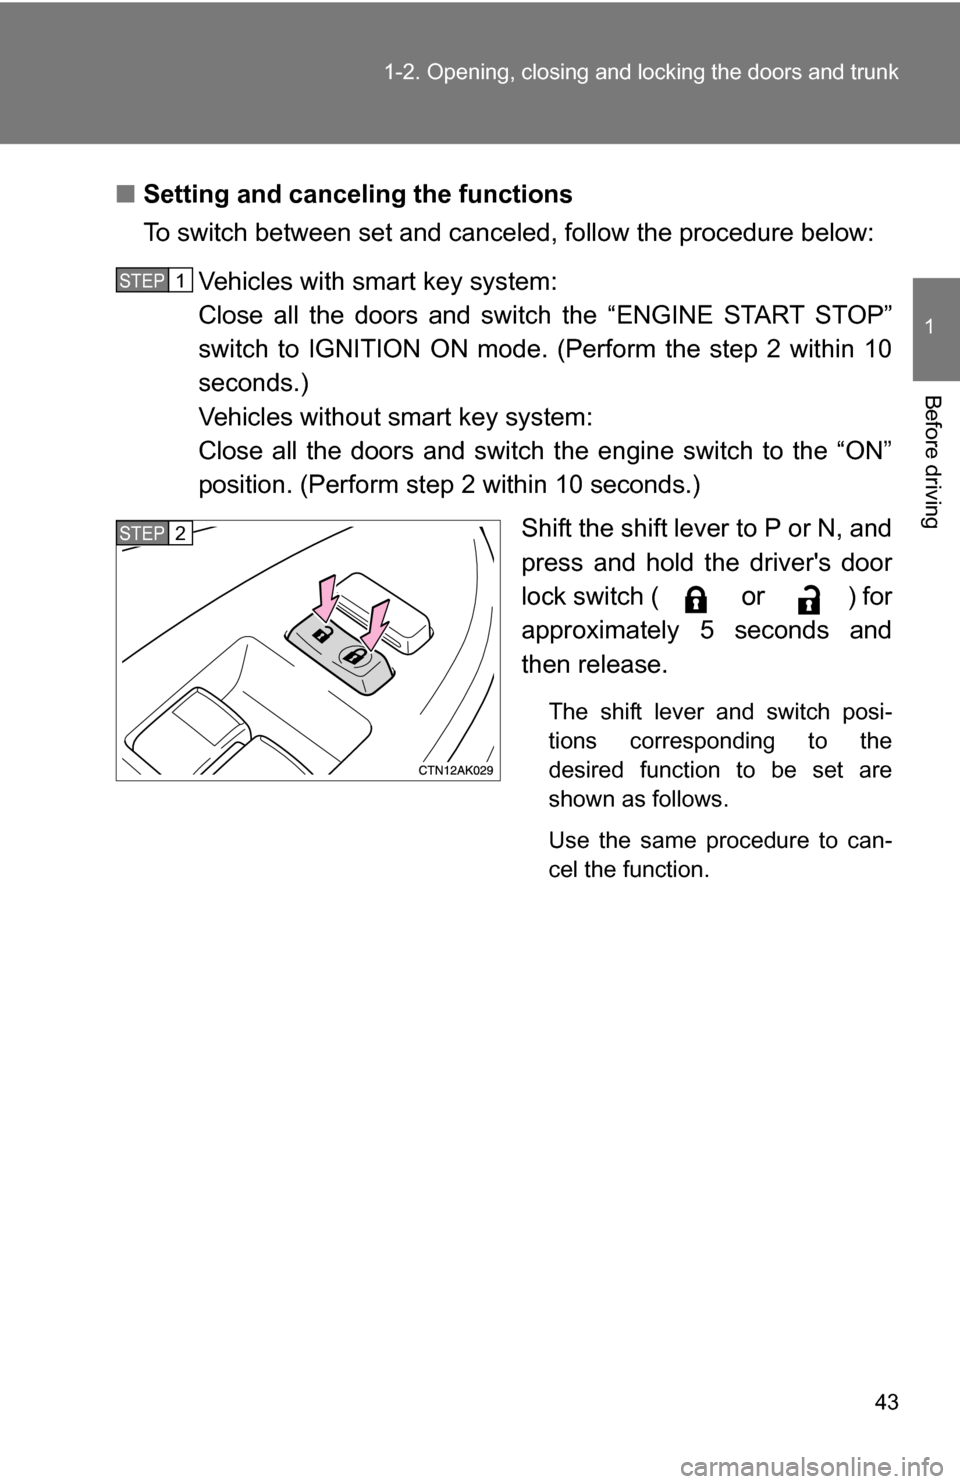 TOYOTA COROLLA 2010 10.G Owners Manual 43
1-2. Opening, closing and locking the doors and trunk
1
Before driving
■
Setting and canceling the functions
To switch between set and canceled, follow the procedure below:
Vehicles with smart ke